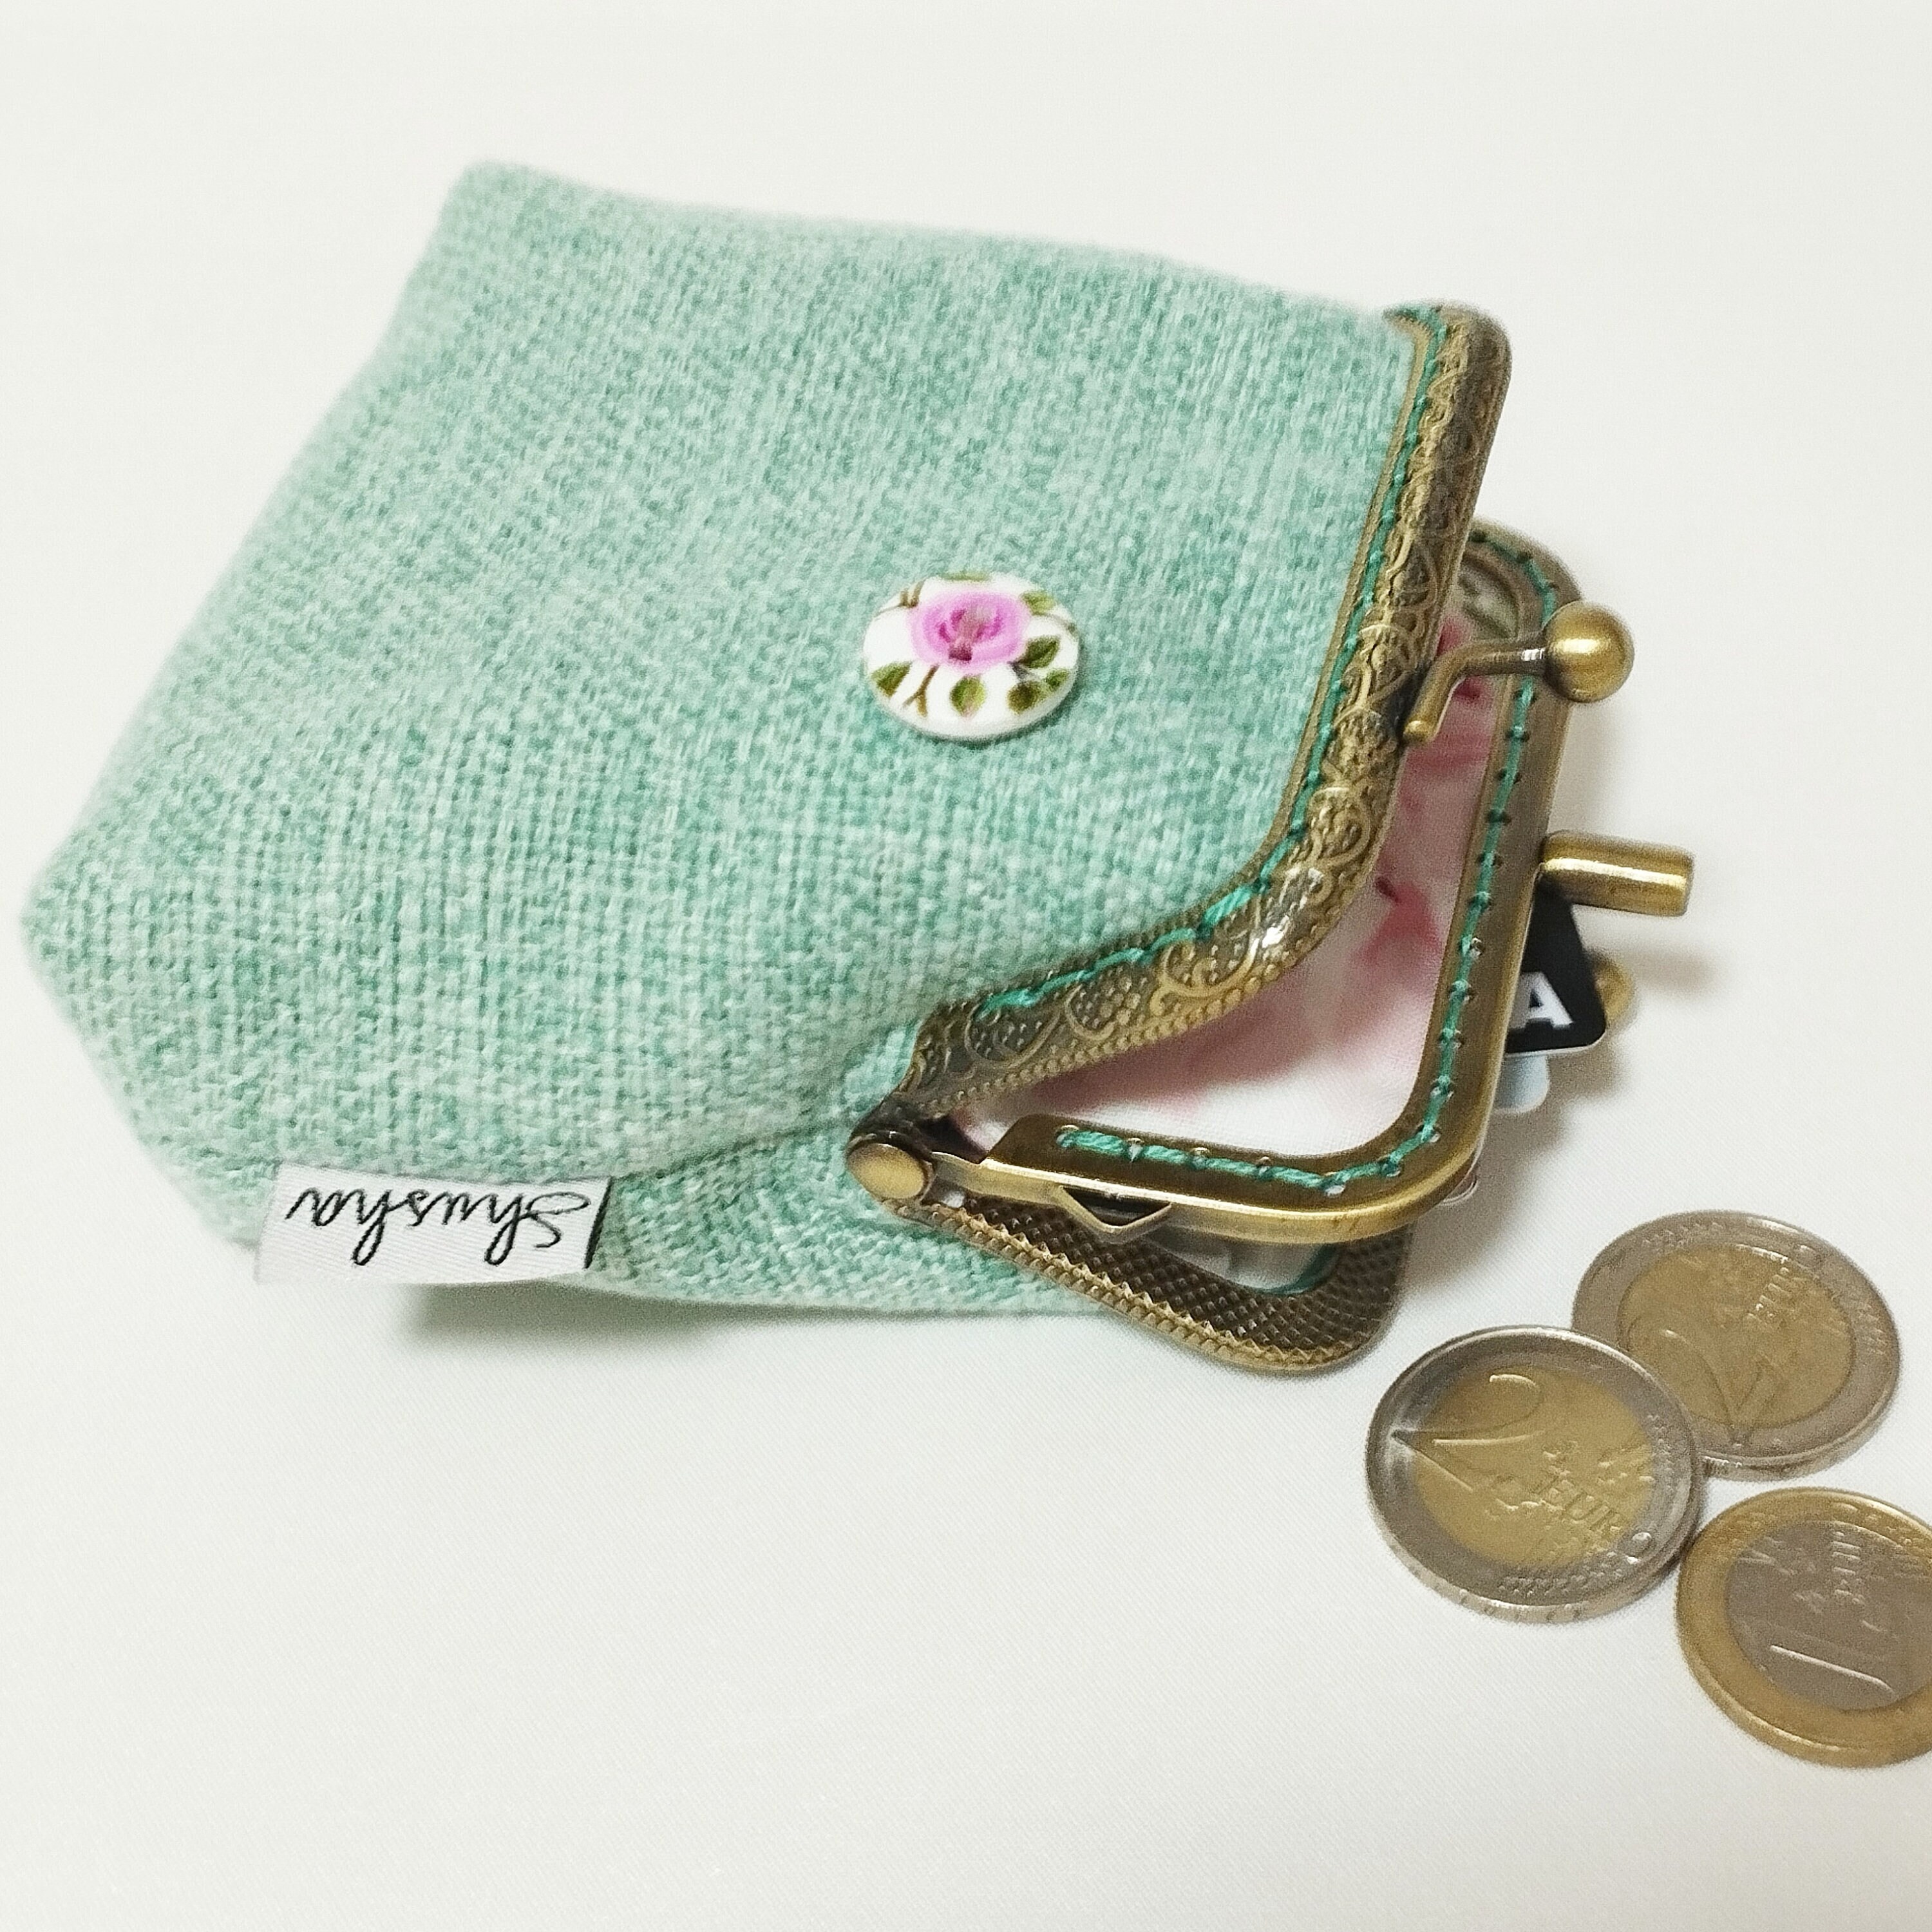 Double Pockets Coin Purse, Handmade Coin Purse, Kisslock Coin Purse, Small Coin Purse, Mini Coin Purse, Personalized Women Gift, Change Bag